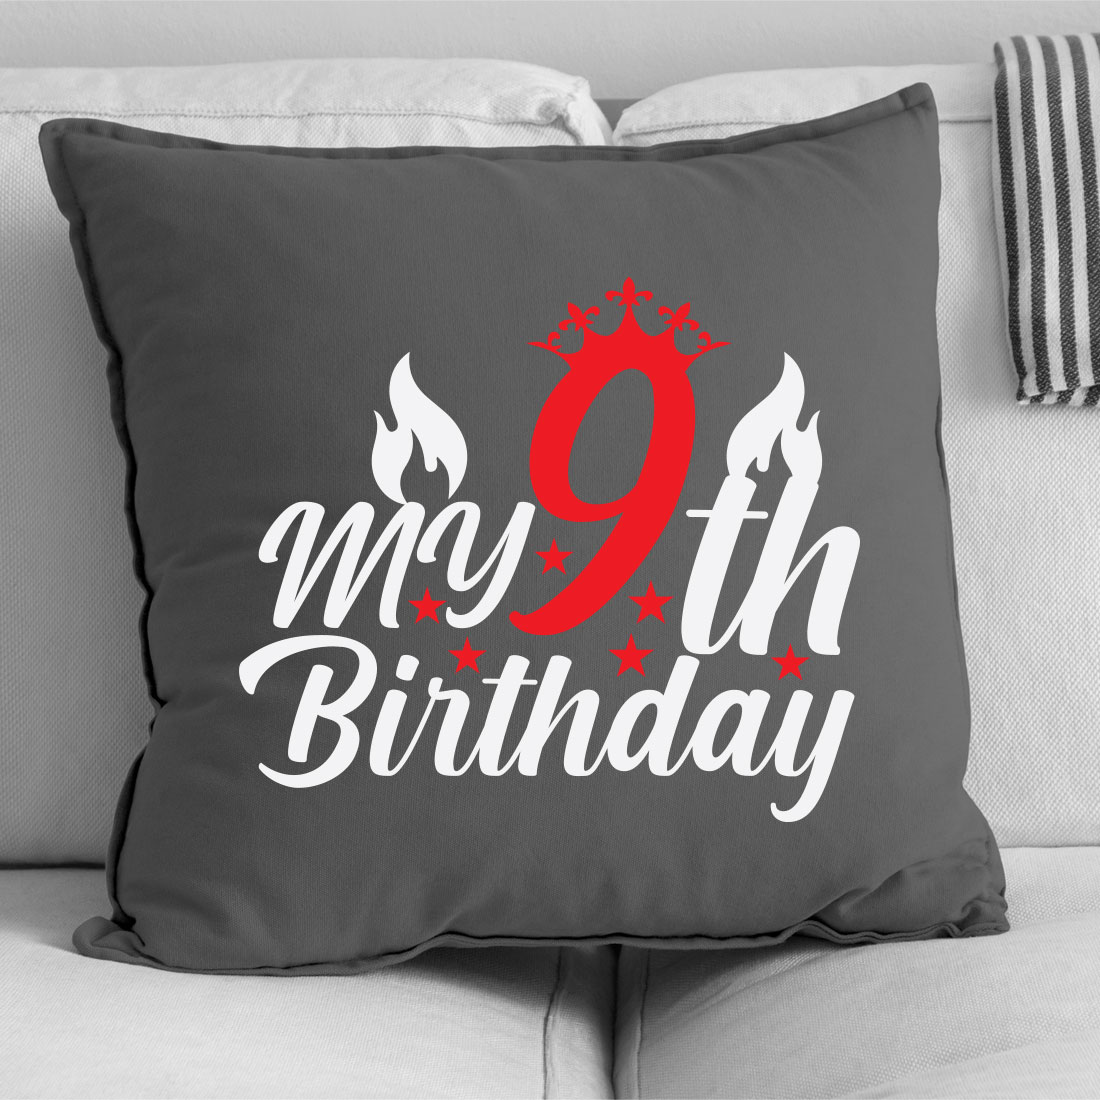 Pillow that says my 9th birthday on it.